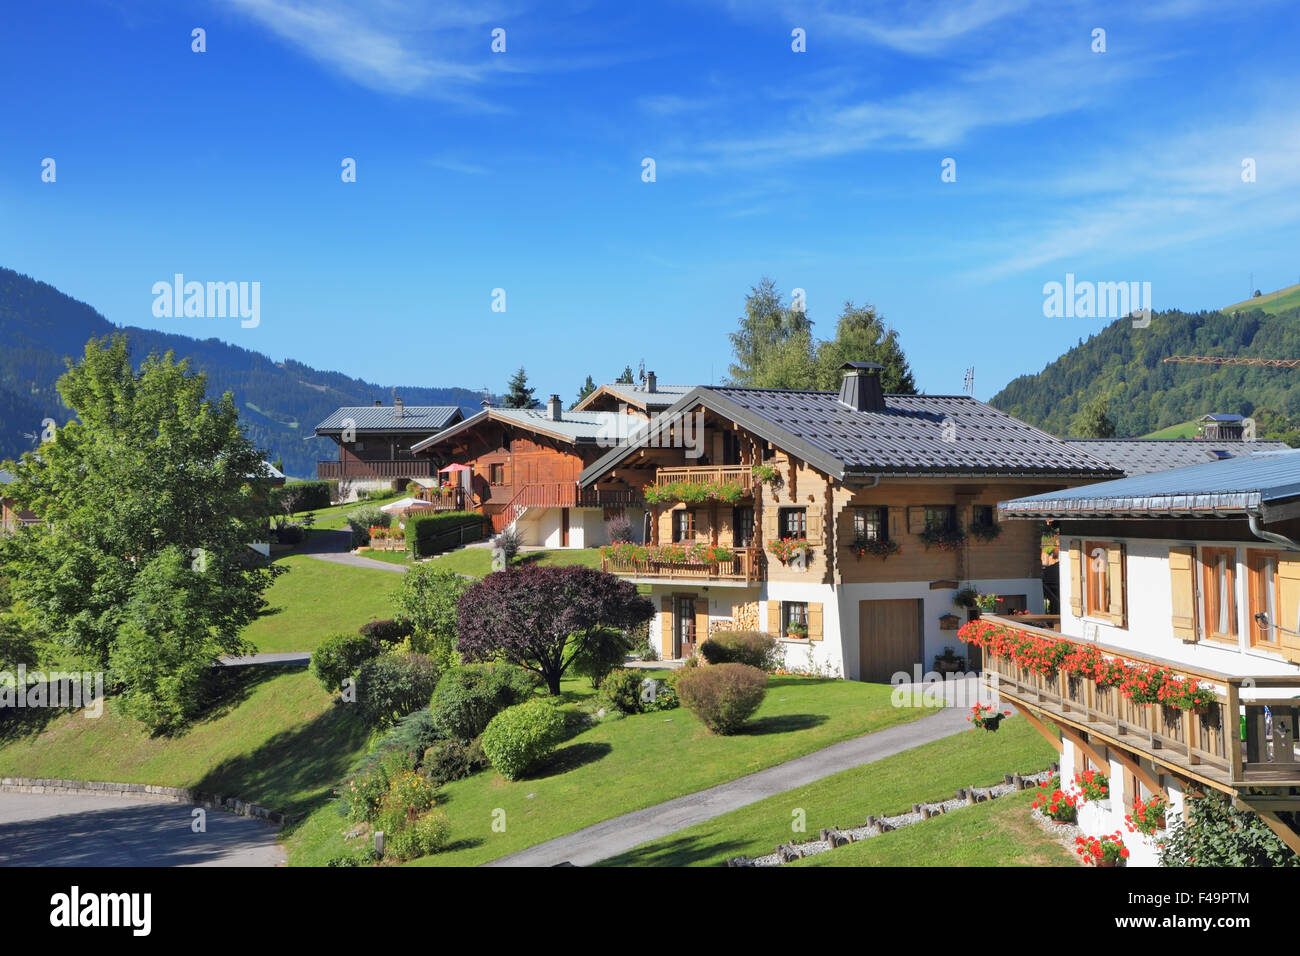 Green alpine meadows and chalets. Stock Photo